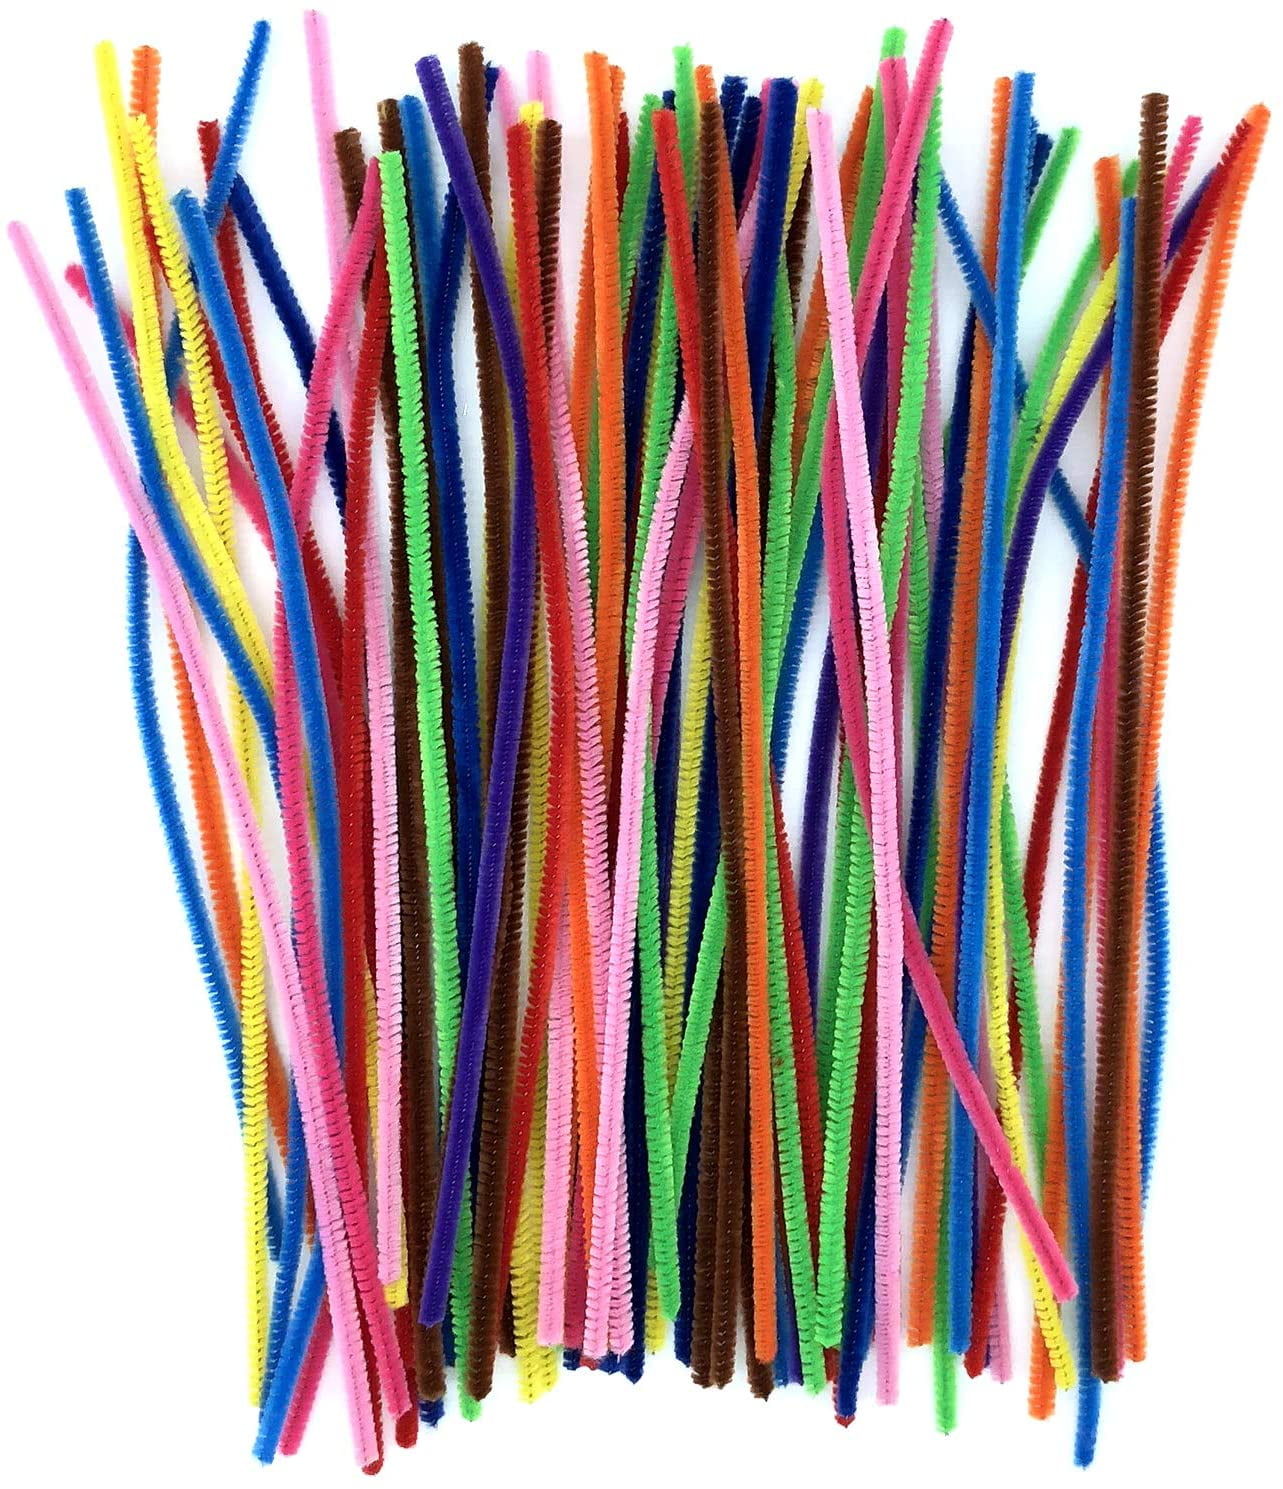 80 Pcs Pipe Cleaners Craft Chenille Stems, 6 mm x 12 Inch10 Colors Pom Poms  Craft Sticks Craft Supplies Pipecleaners for DIY Art Creative Crafts